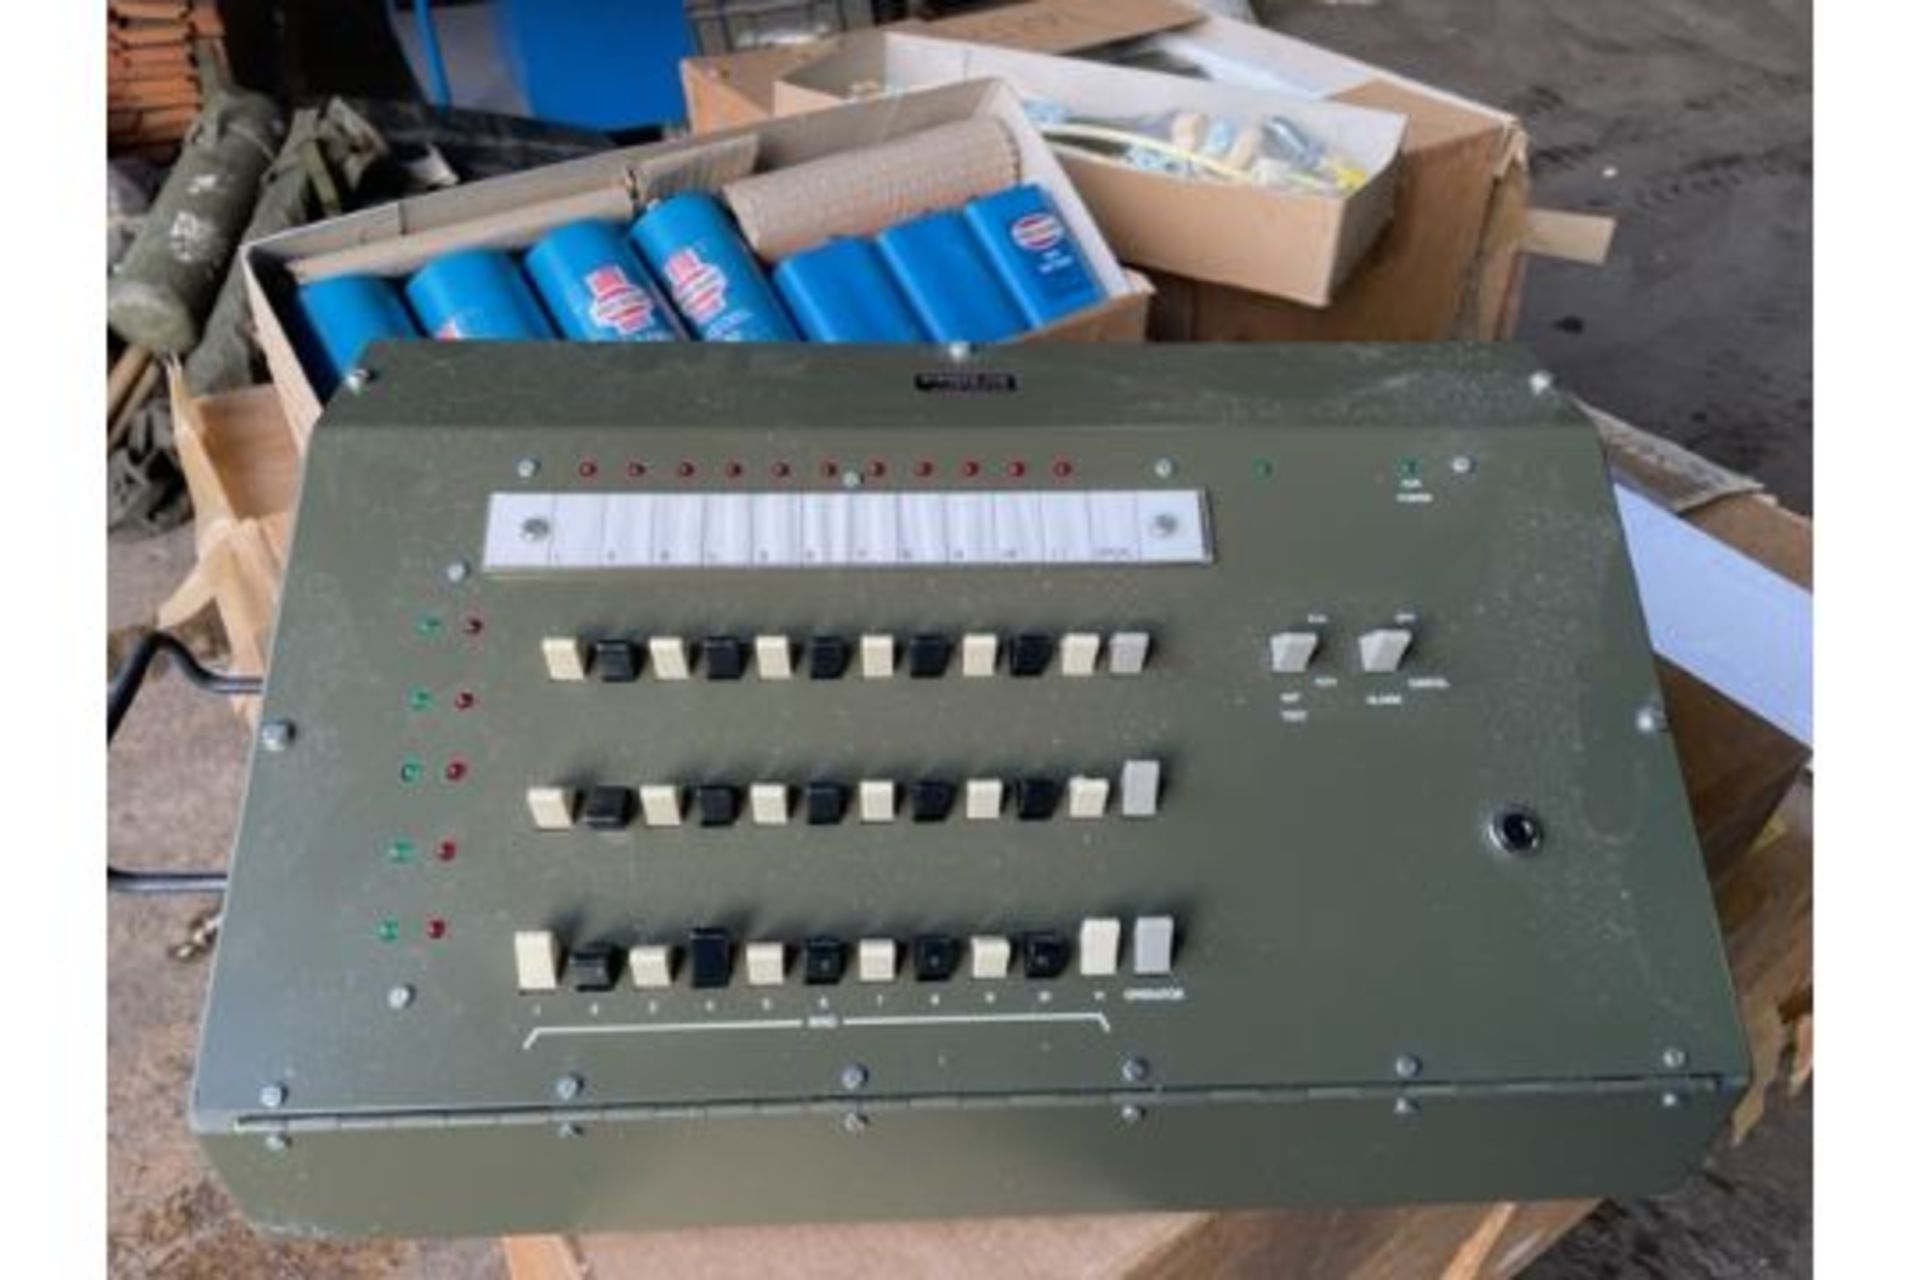 Q 10x New Unissued 11 Line Switch Board c/w Batteries, Leads, Connectors etc in Original packing.